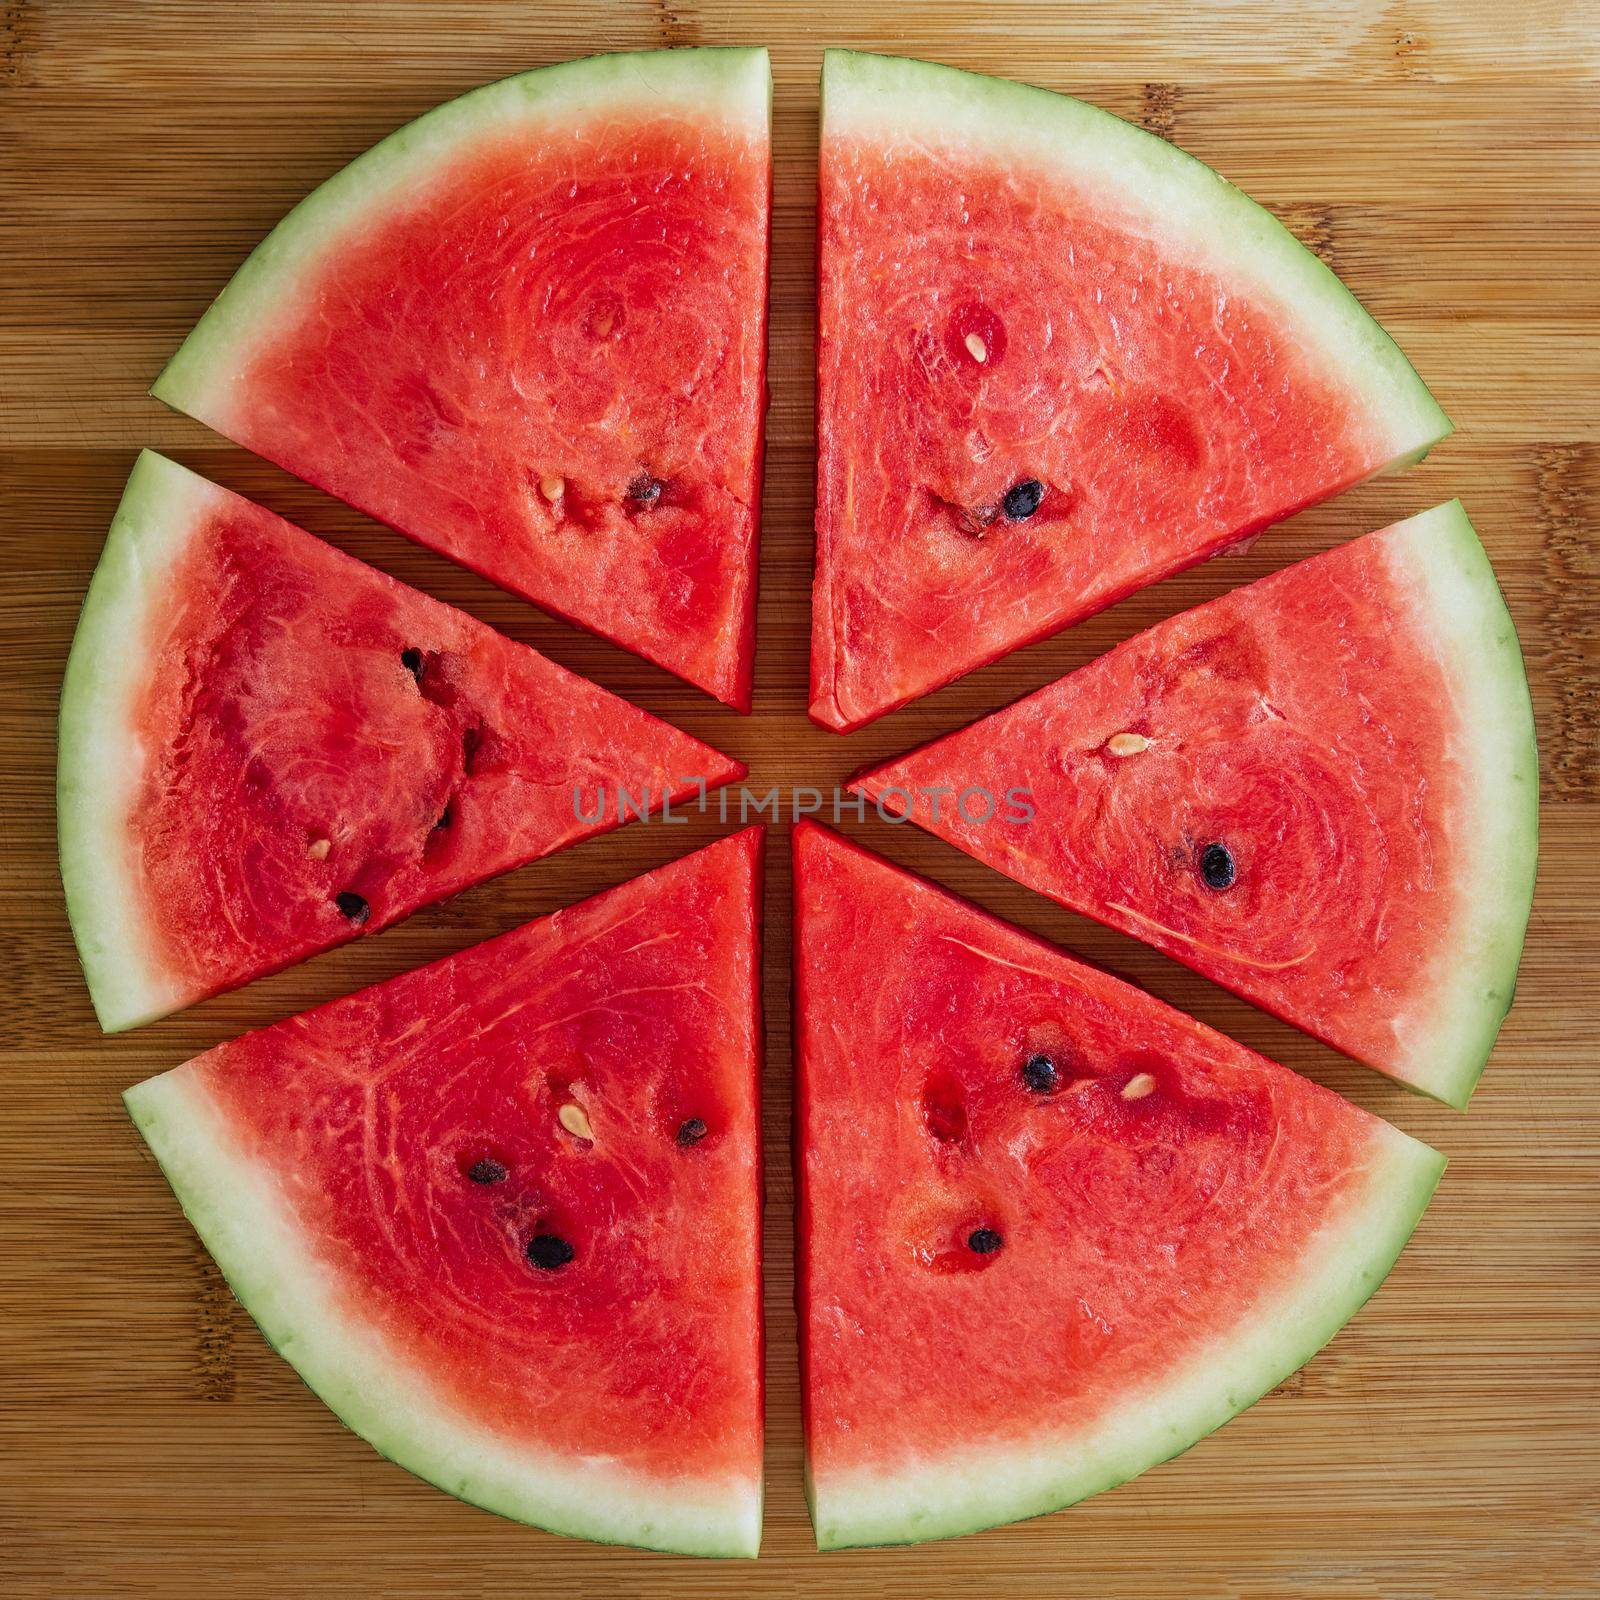 Slices of fresh red tasty watermelon laid out in a circle on a wooden background. by Andre1ns